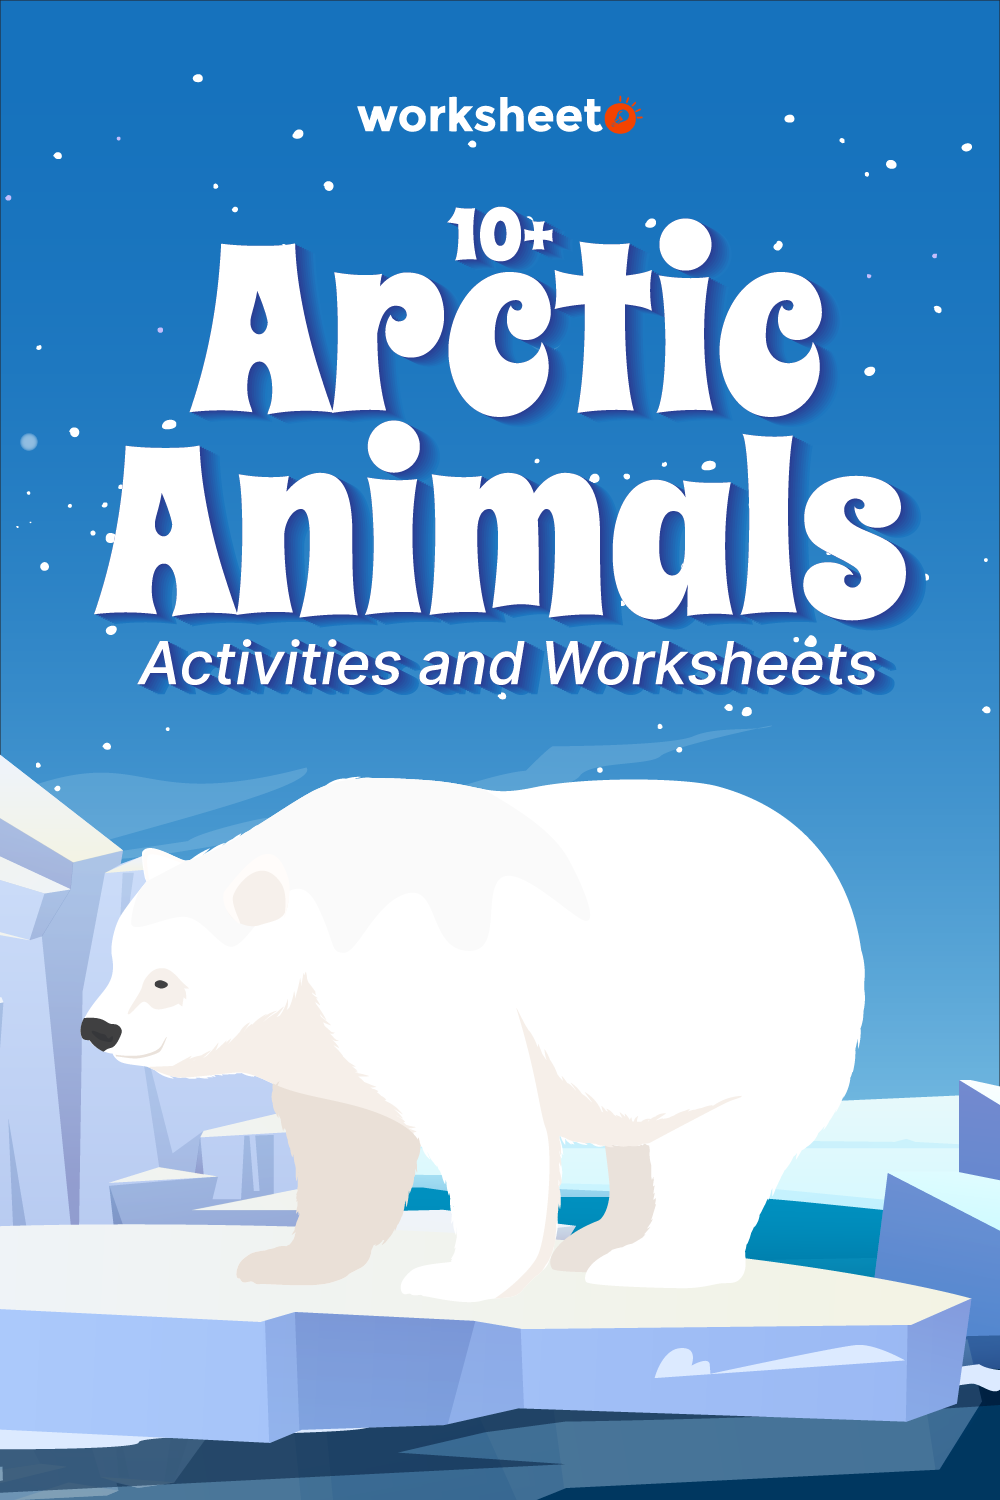 Arctic Animals Activities and Worksheets